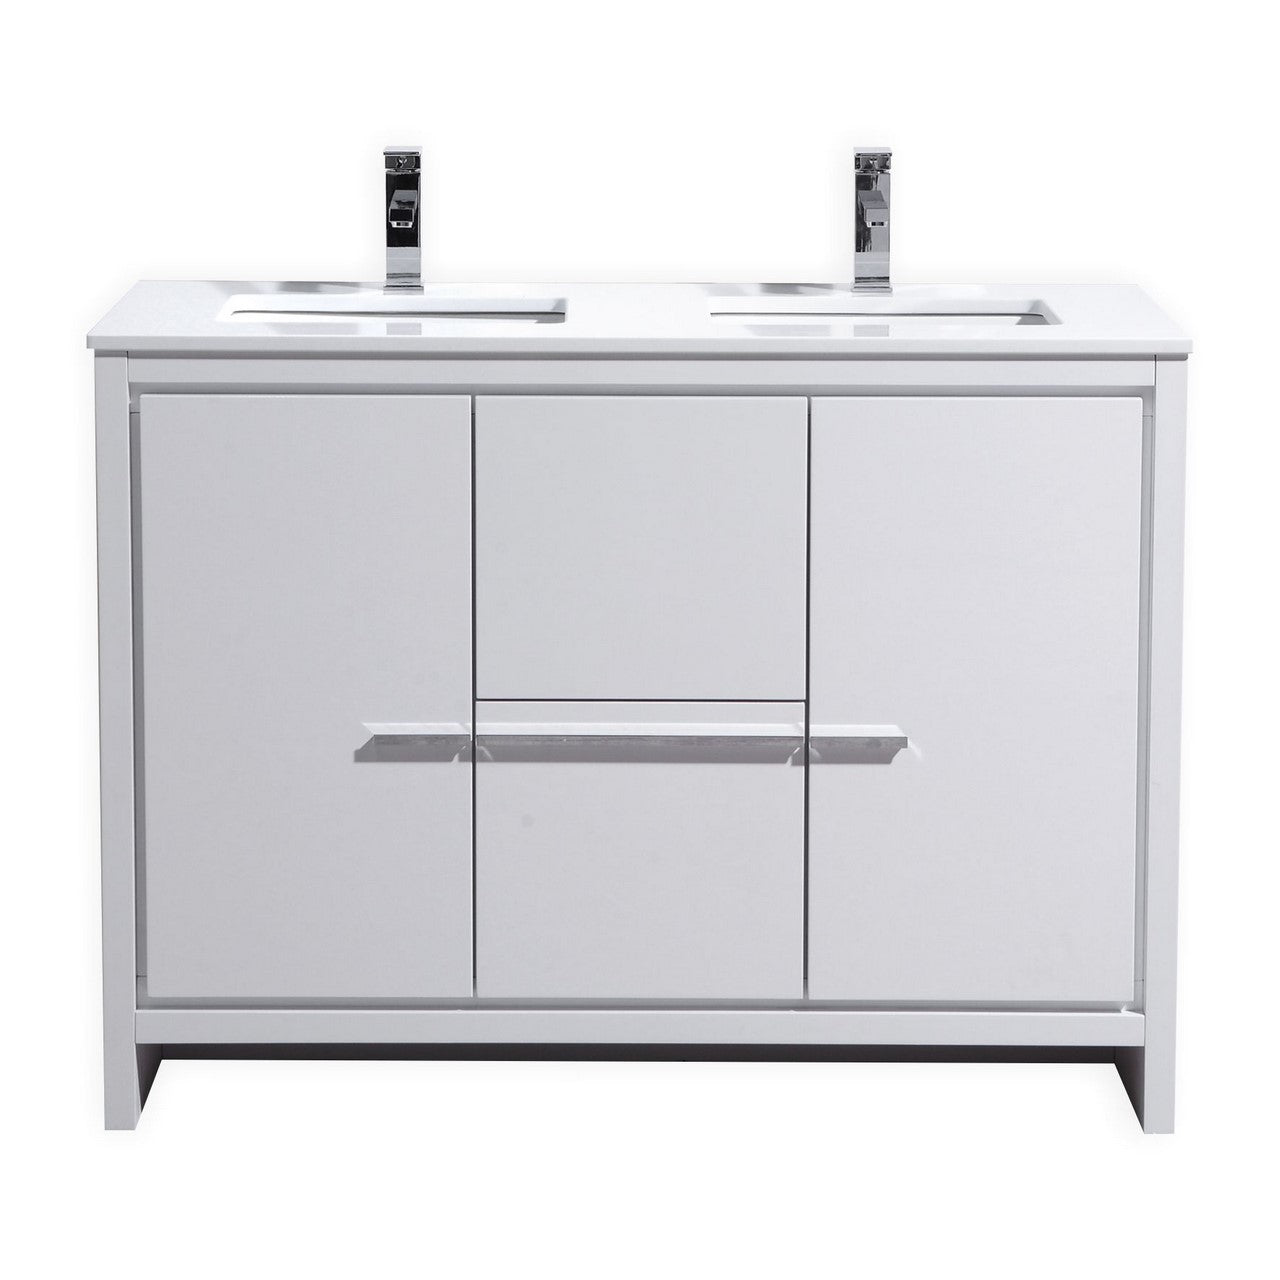 KUBEBATH Dolce AD648DGW 48" Double Bathroom Vanity in High Gloss White with White Quartz, Rectangle Sinks, Front View